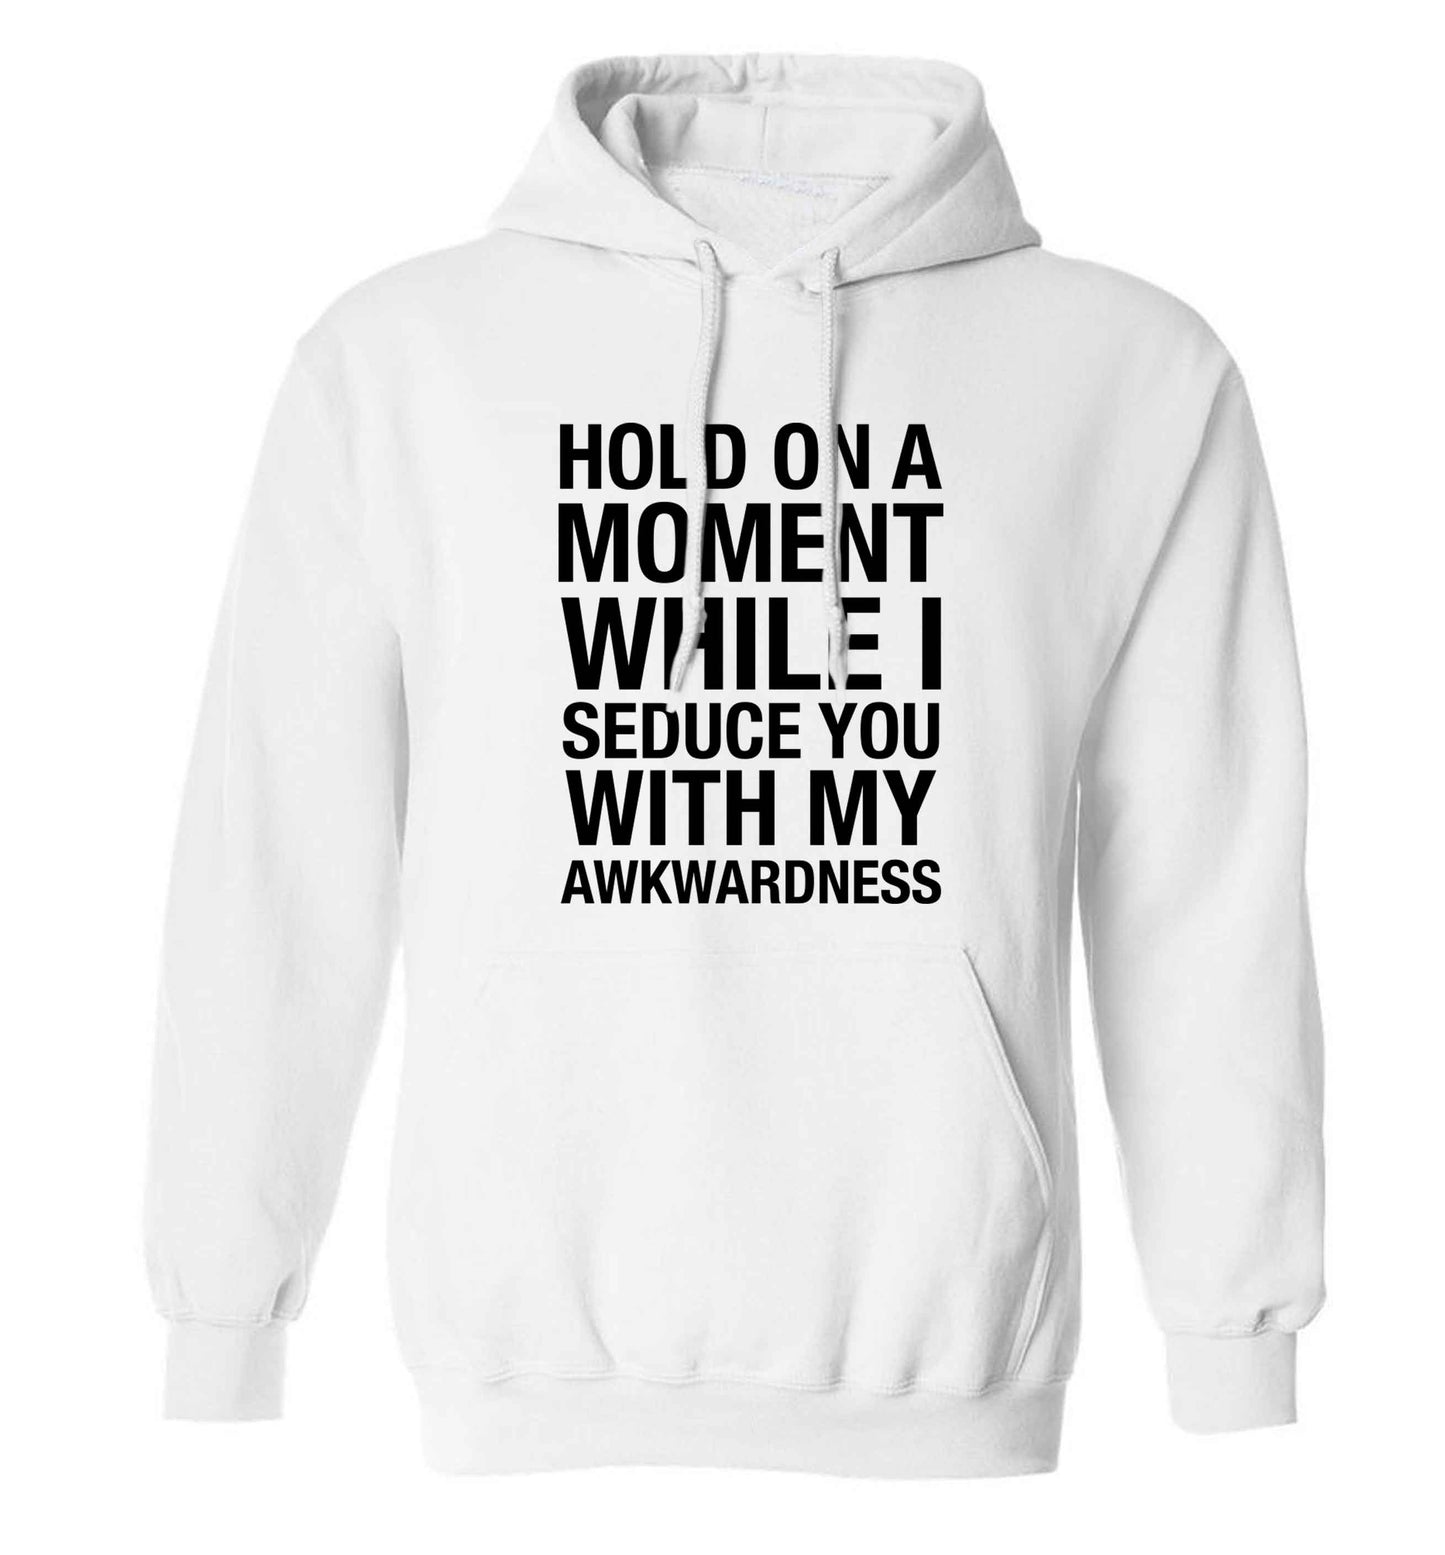 Hold on a moment while I seduce you with my awkwardness adults unisex white hoodie 2XL